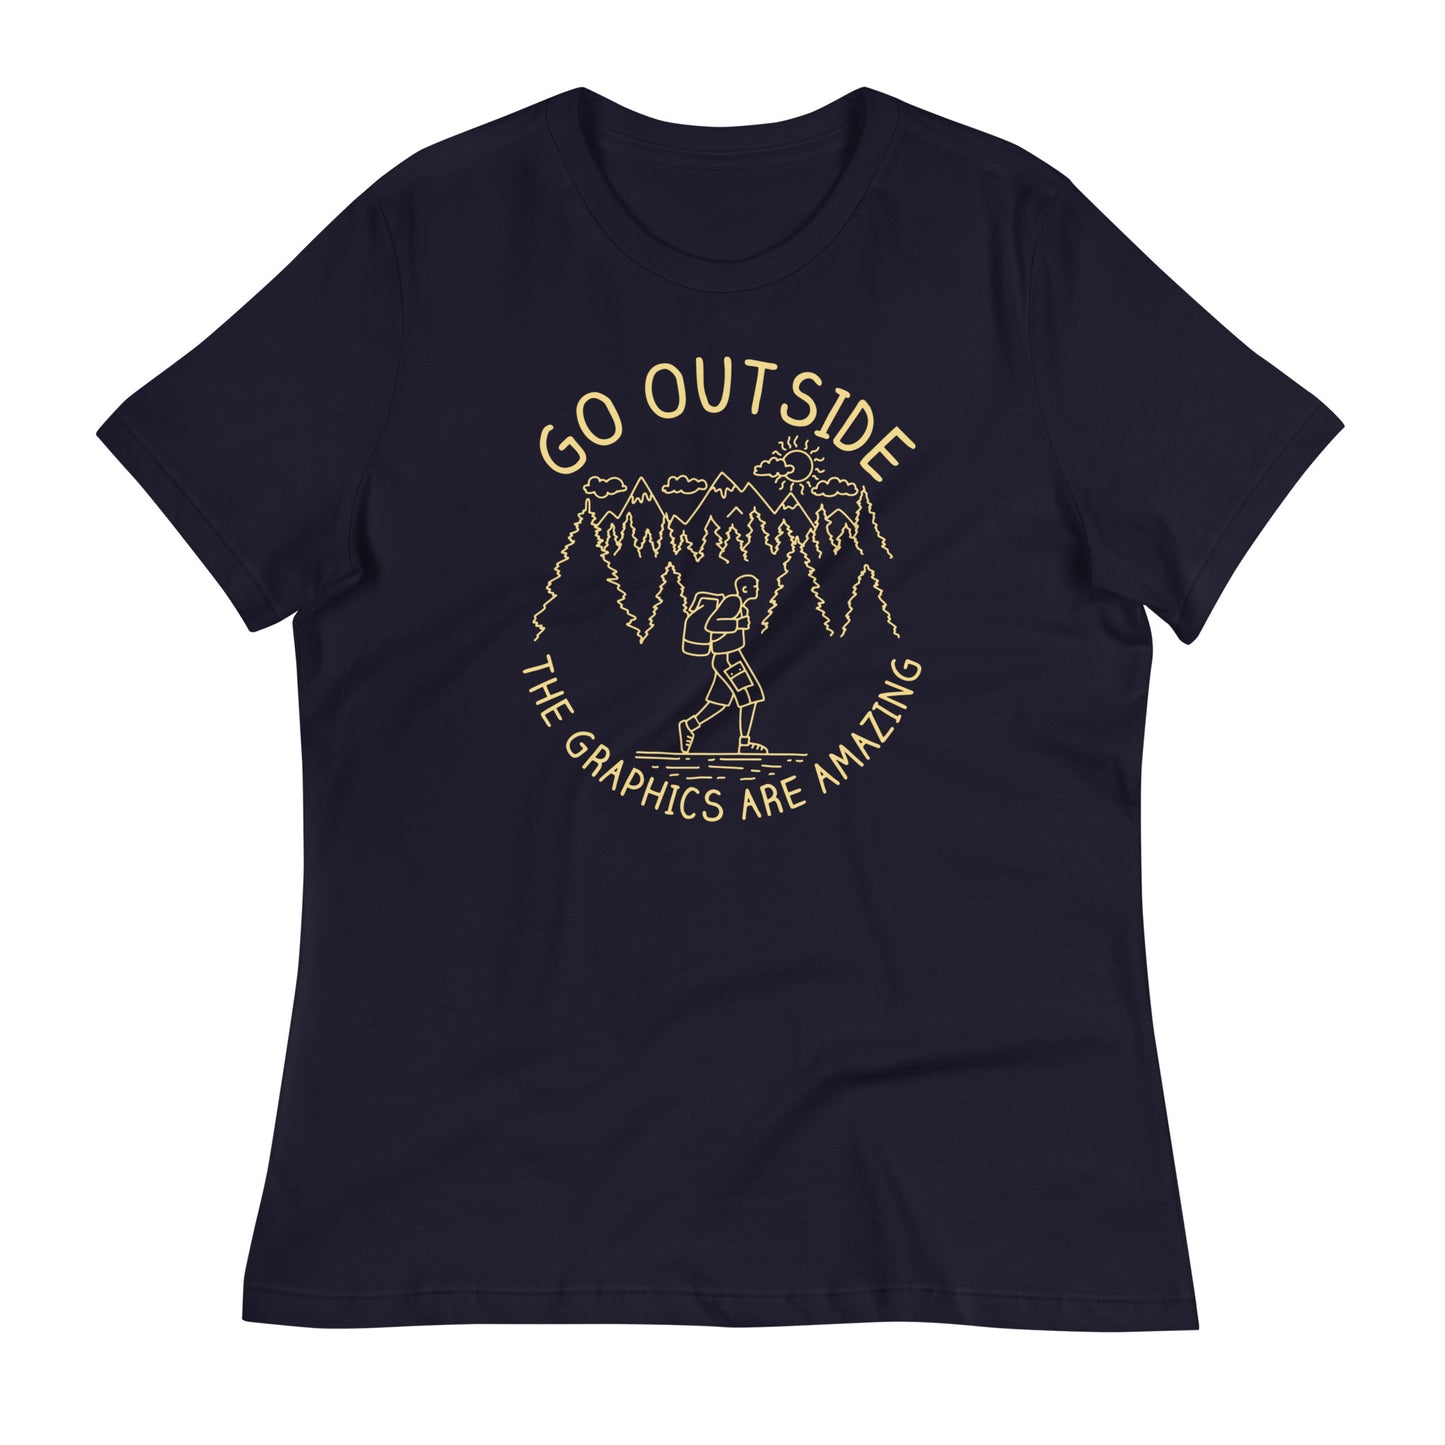 Go Outside The Graphics Are Amazing Women's Signature Tee